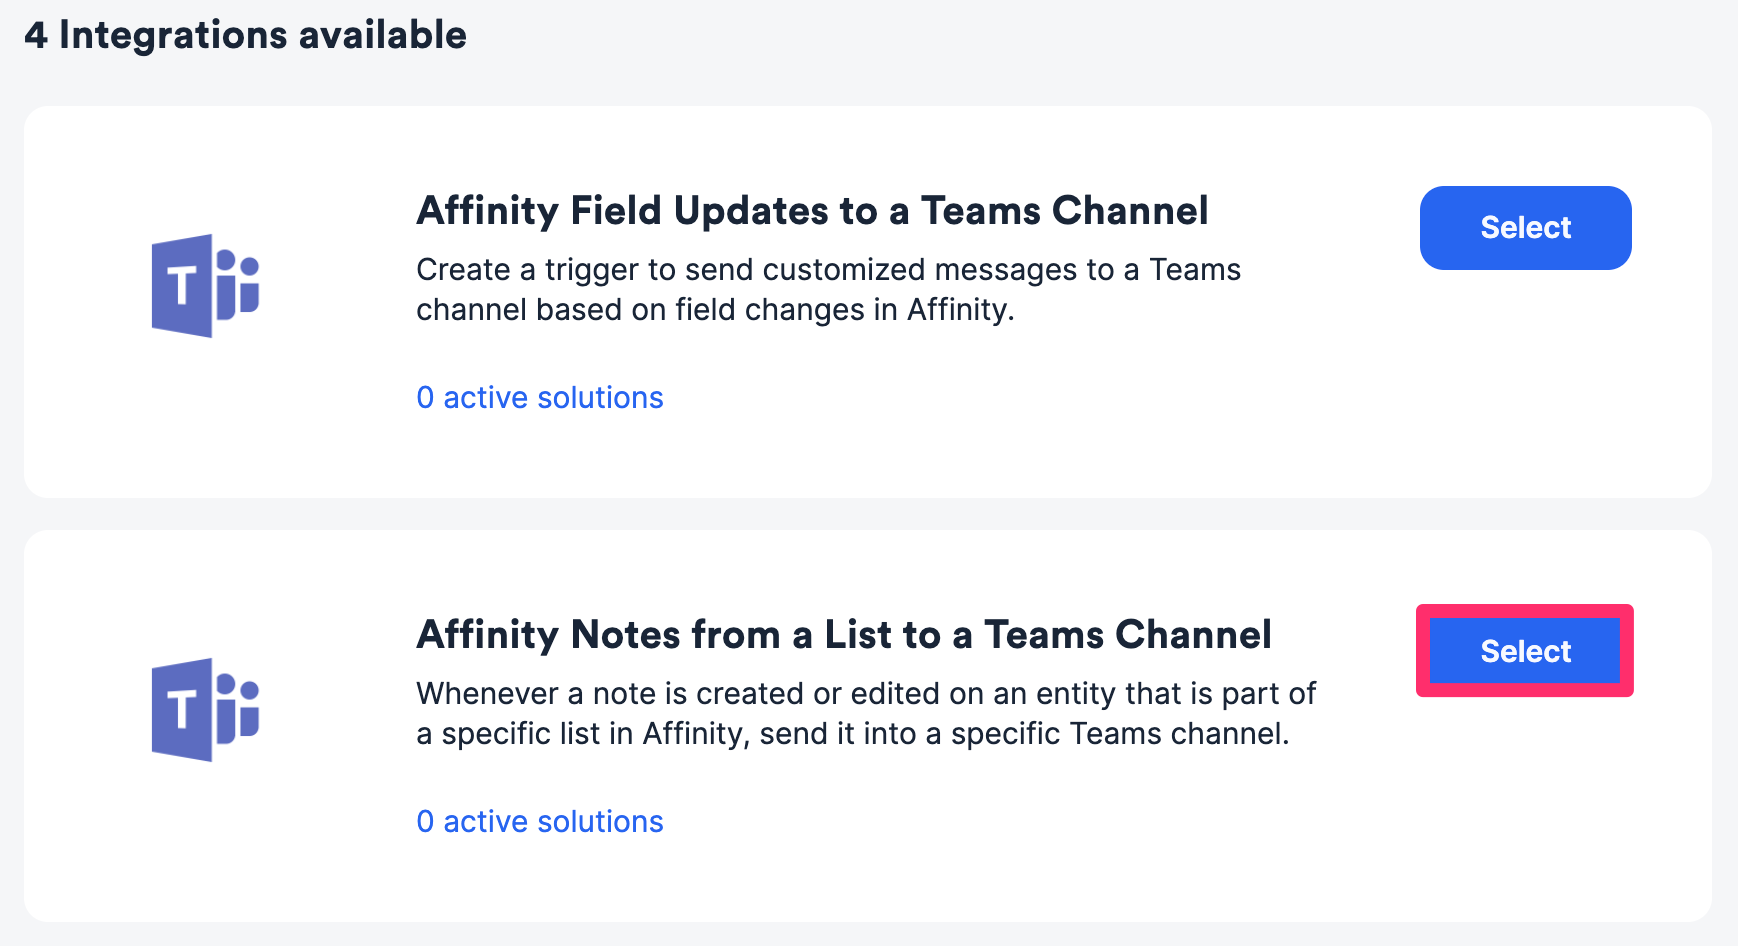 Affinity_Notes_from_a_List_to_a_Teams_Channel.png